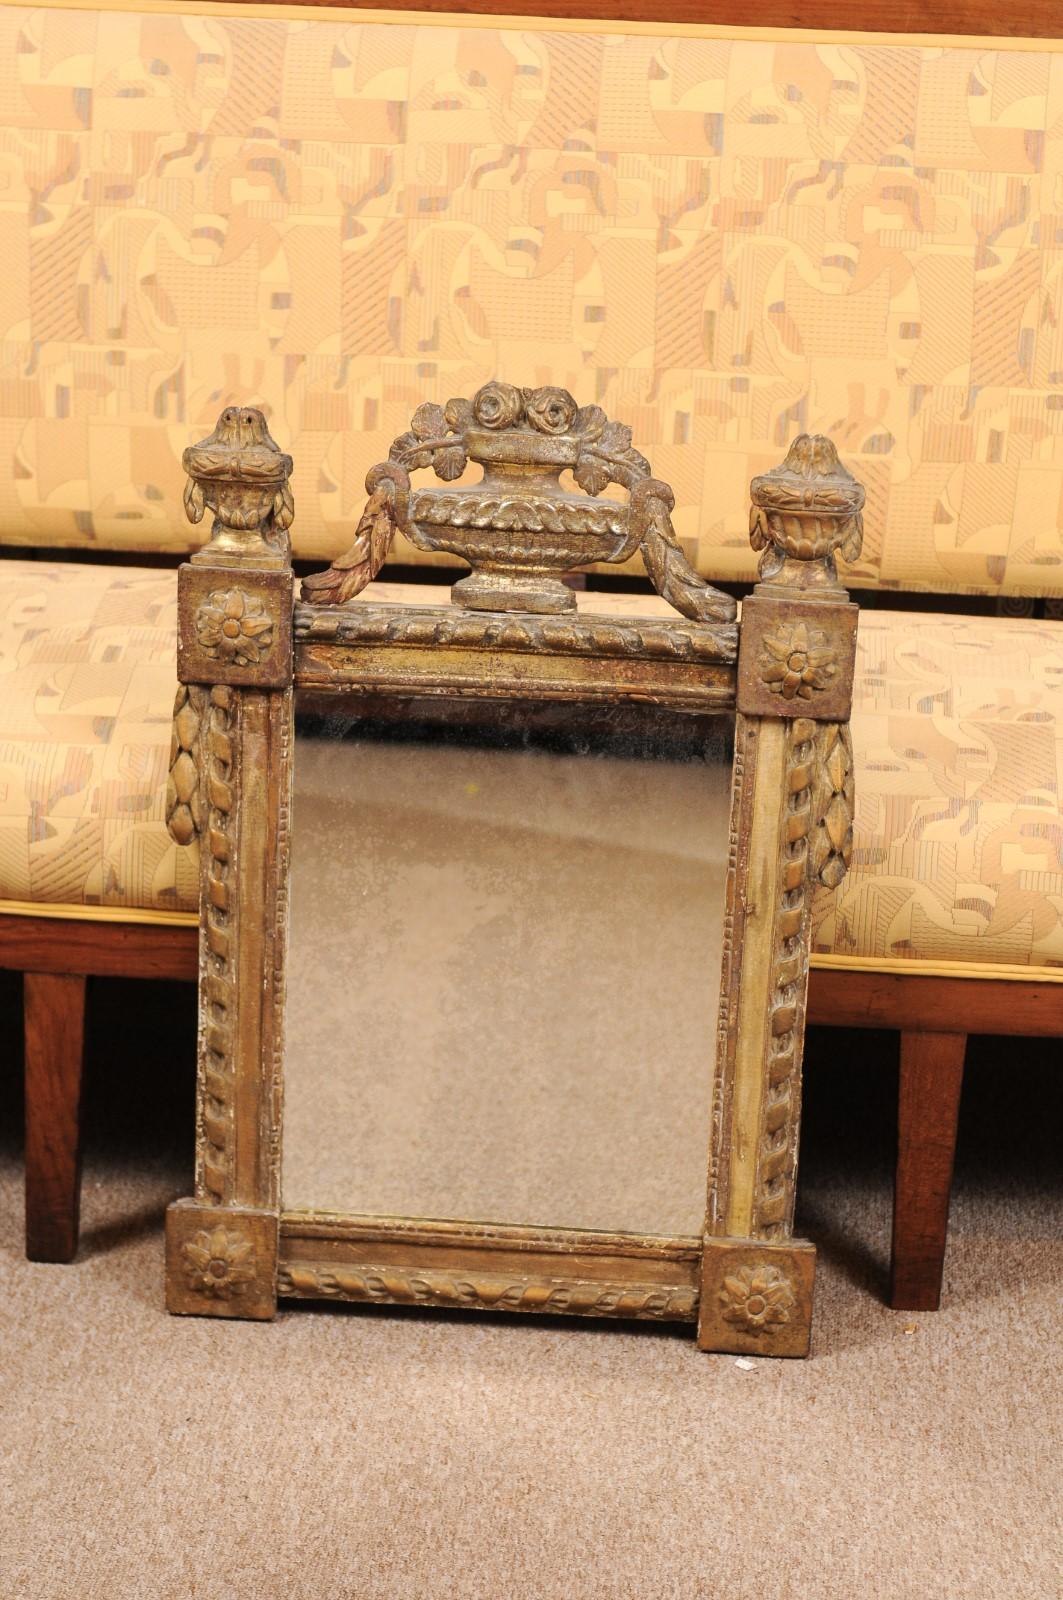 Late 18th century French Louis XVI period giltwood mirror with urn crest.